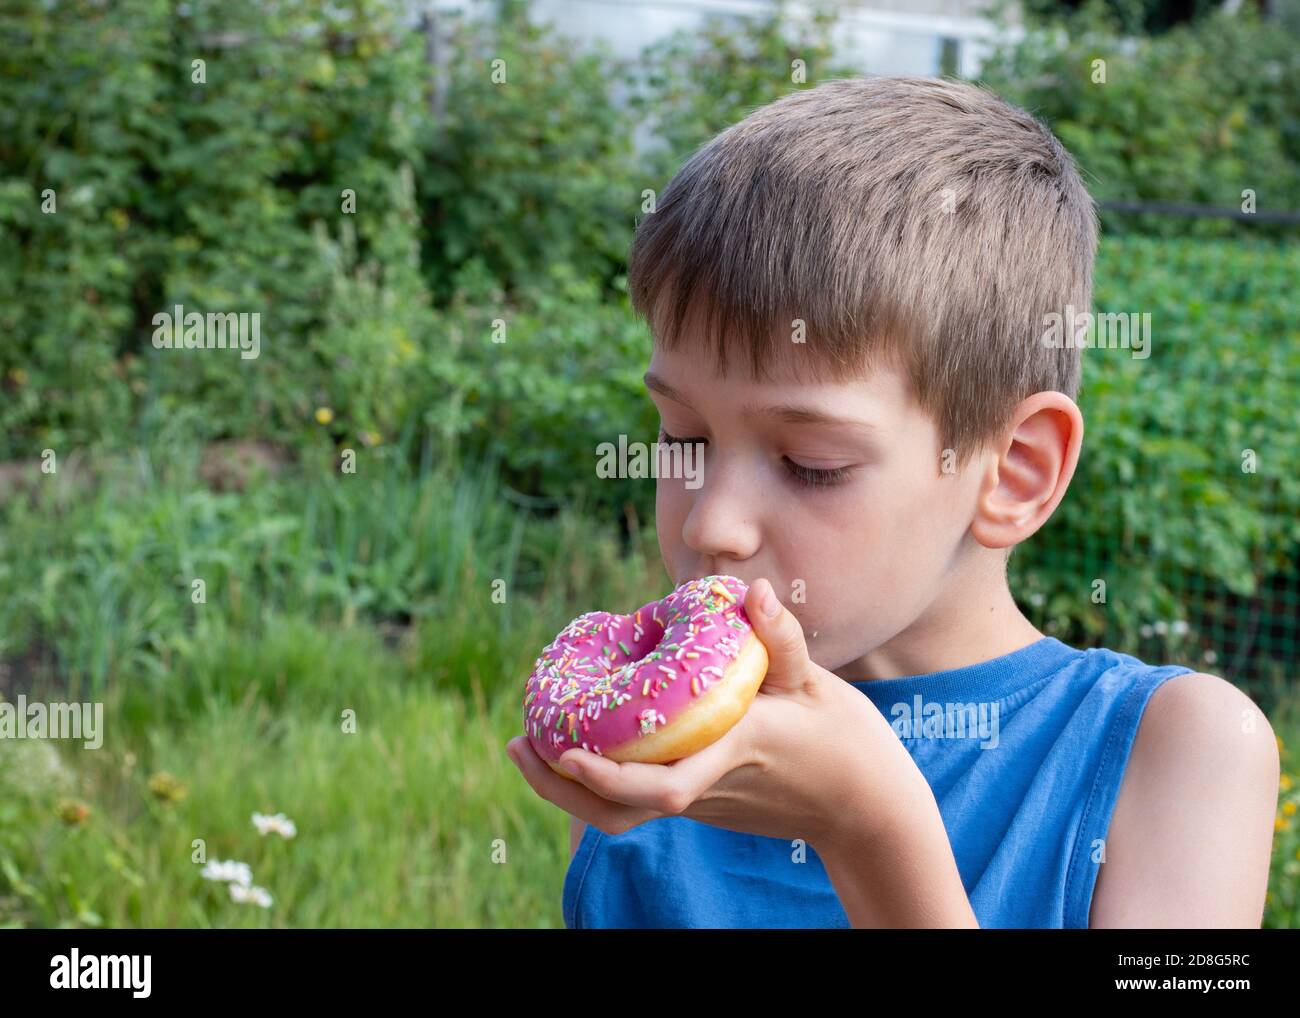 Caucasian boy eats pink donut. A child holds a sweet treat in the park. Unhealthy food concept, snacking sweet food Stock Photo